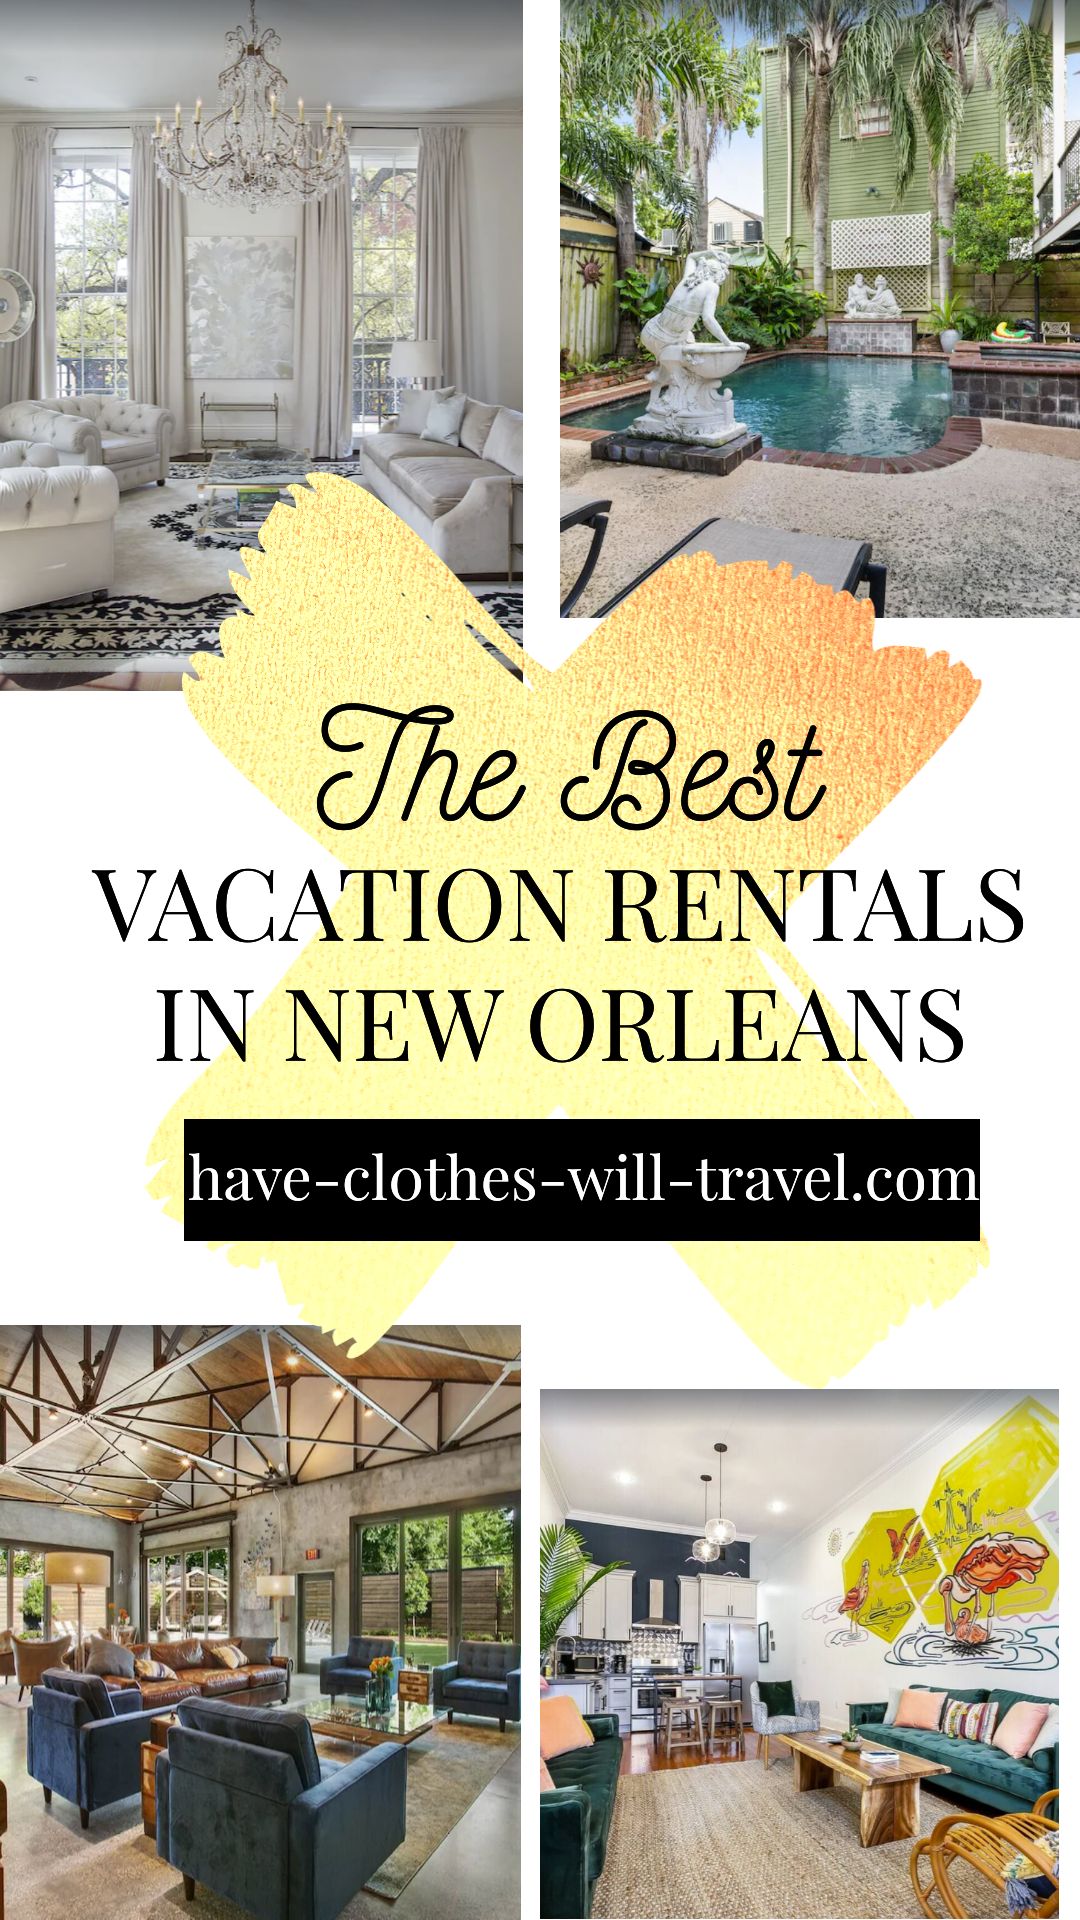 A collage of 4 images of New Orleans rental homes on VRBO. Text in the center of the image says "the best vacation rentals in New Orleans"